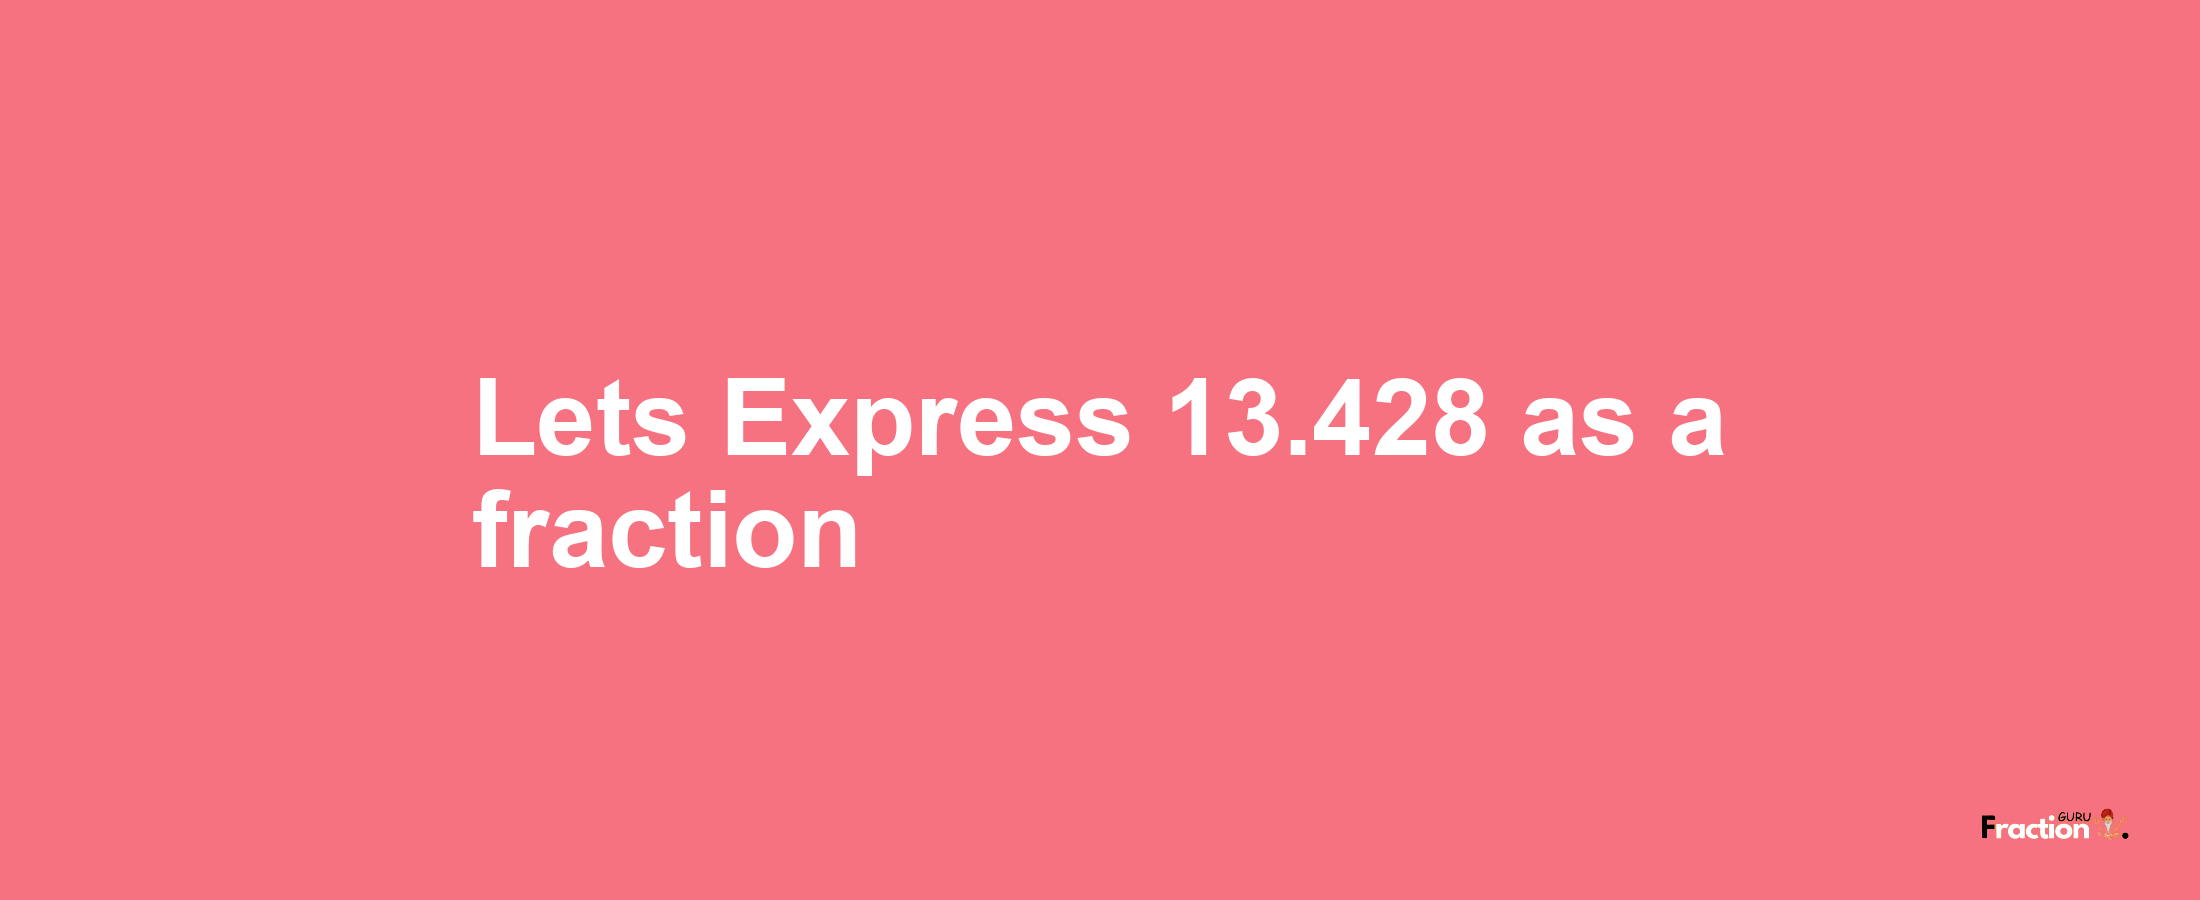 Lets Express 13.428 as afraction